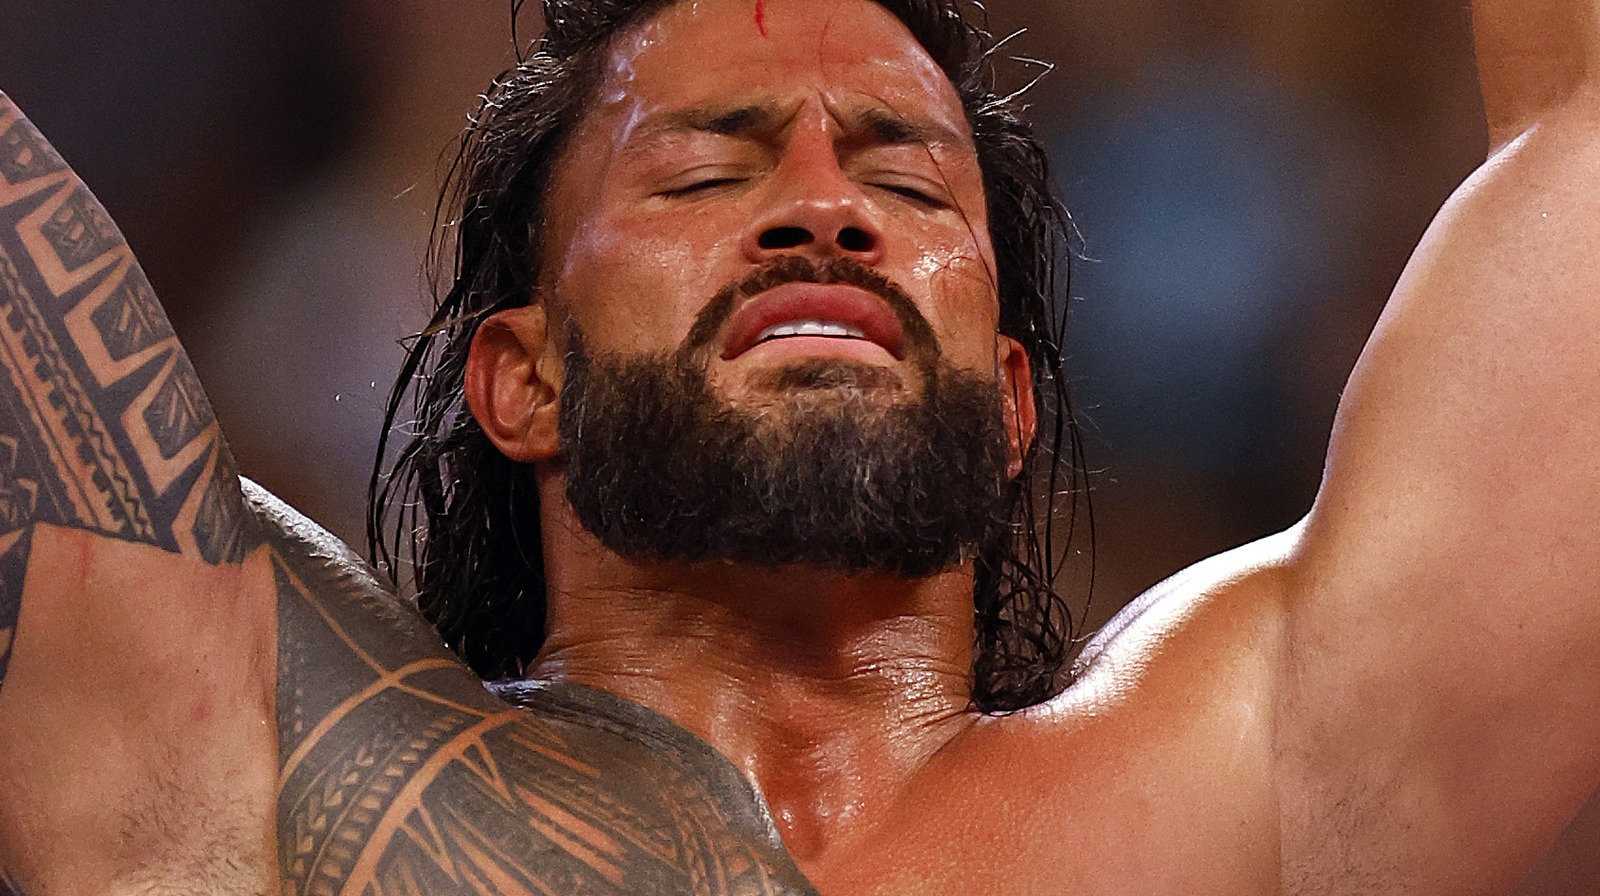 Roman Reigns WrestleMania 39: Is Roman Reigns losing at WWE